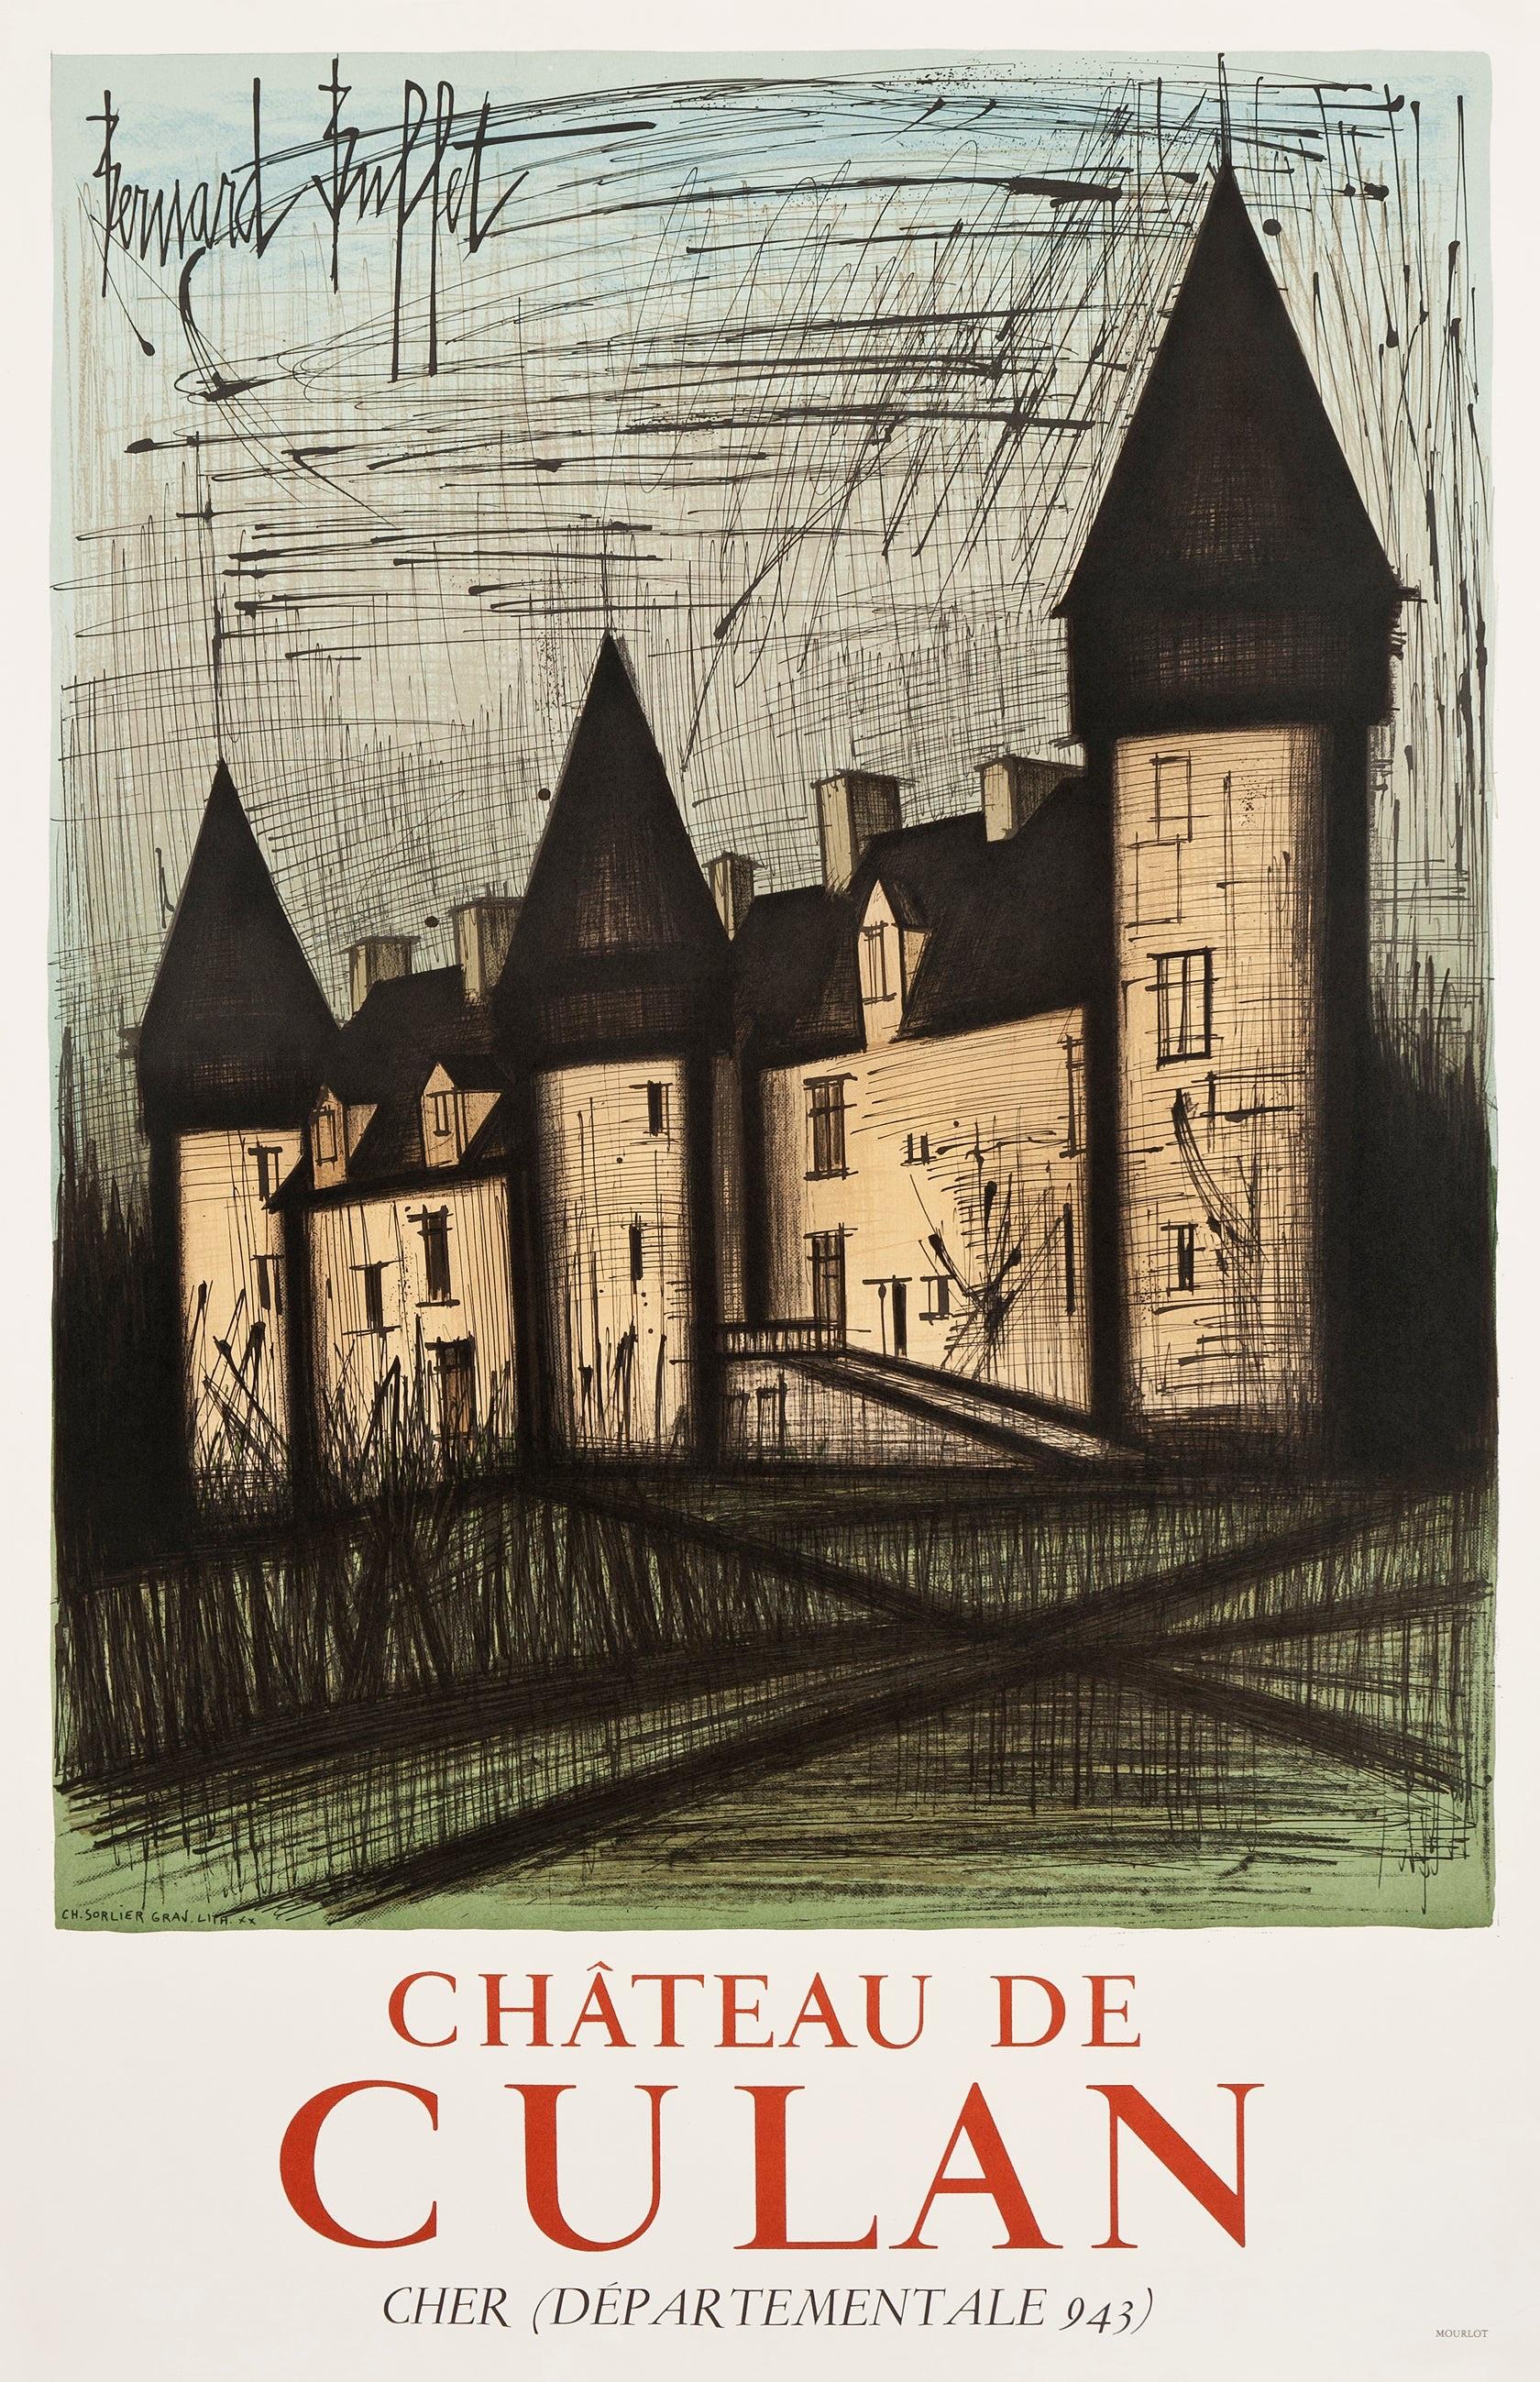 Artist: Bernard Buffet

Medium: Lithographic Poster, 1978

Dimensions: 32.75 x 21.25 in, 83.2 x 53.98 cm

Classic Poster Paper - Perfect Condition A+ 

This lithographic poster was created in 1965 by Famous French artist Bernard Buffet to promote